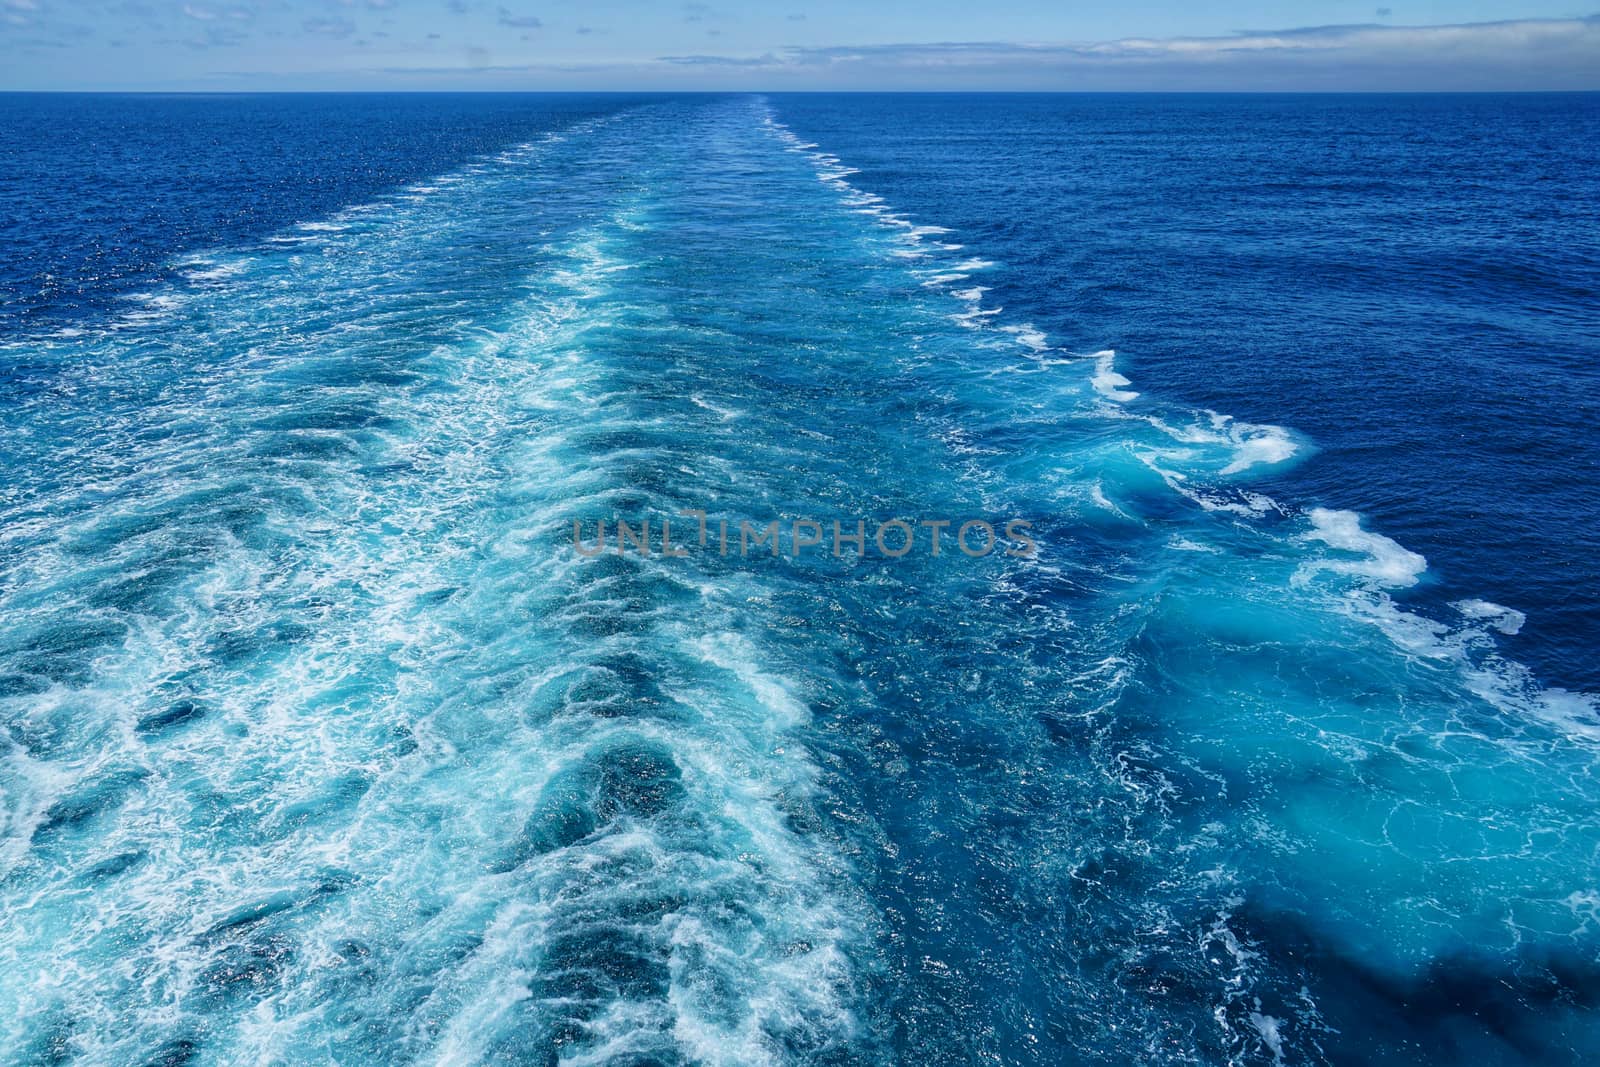 A Cruise ship wake on a beautiful sunny day with white clouds and blue seas on the Atlantic Ocean.